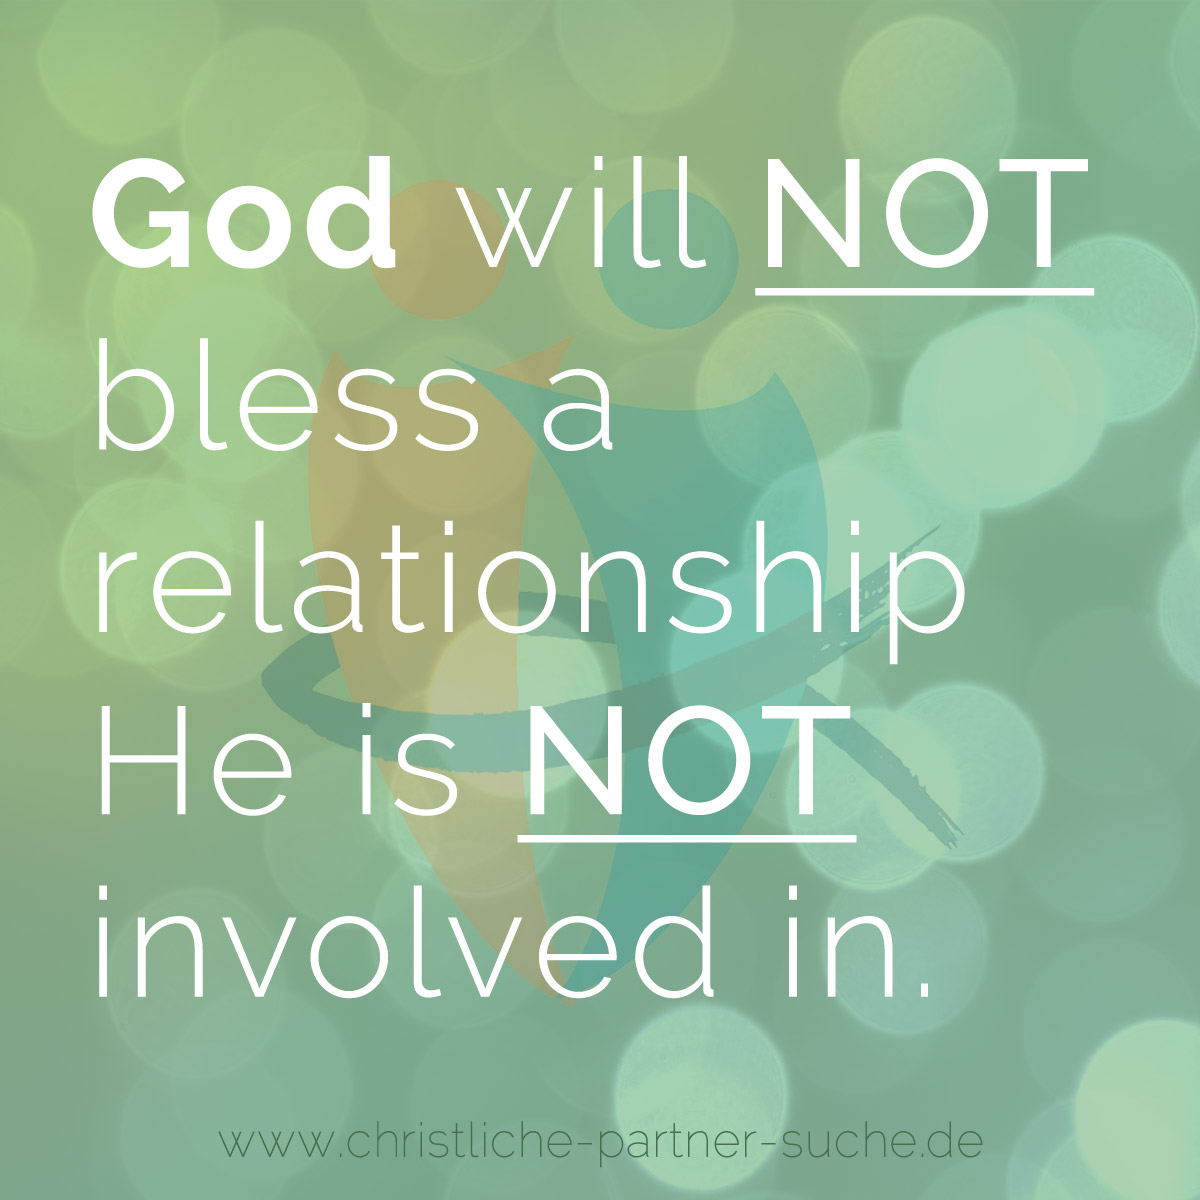 God will NOT bless a relationship